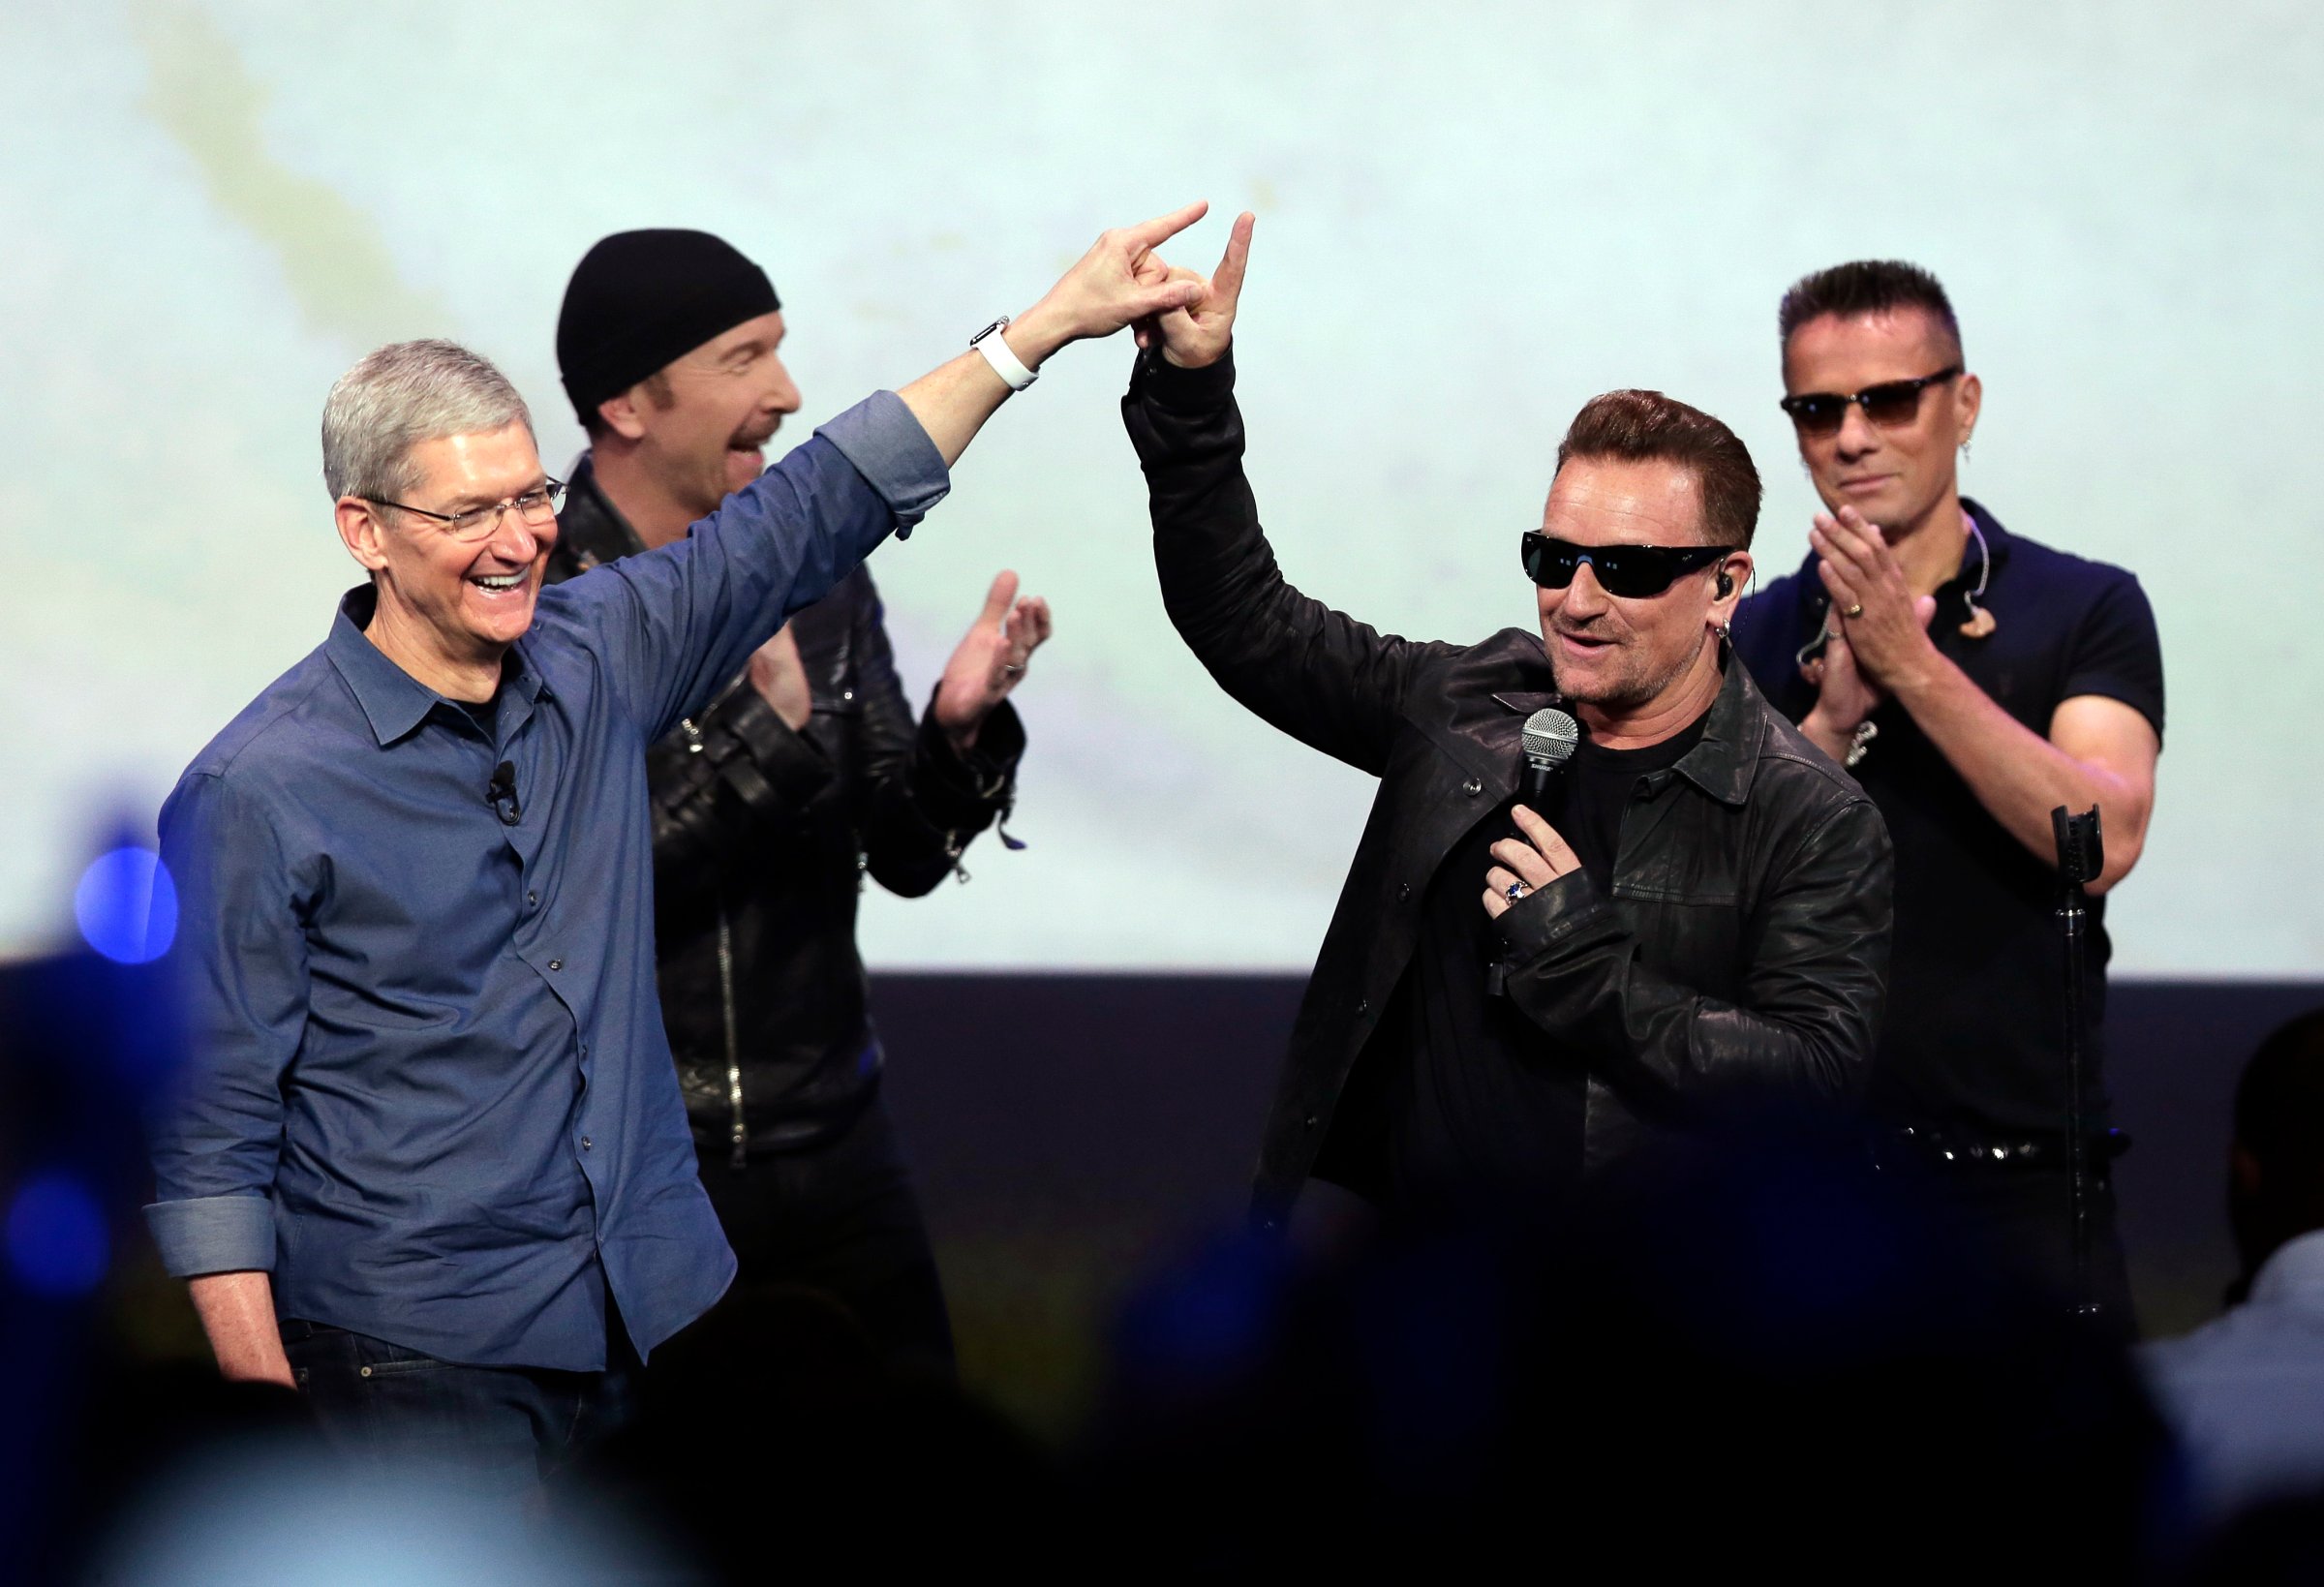 In this Sept. 9, 2014 file photo, Apple CEO Tim Cook (L) greets Bono from the band U2 after they preformed at the end of the Apple event in Cupertino, Calif.